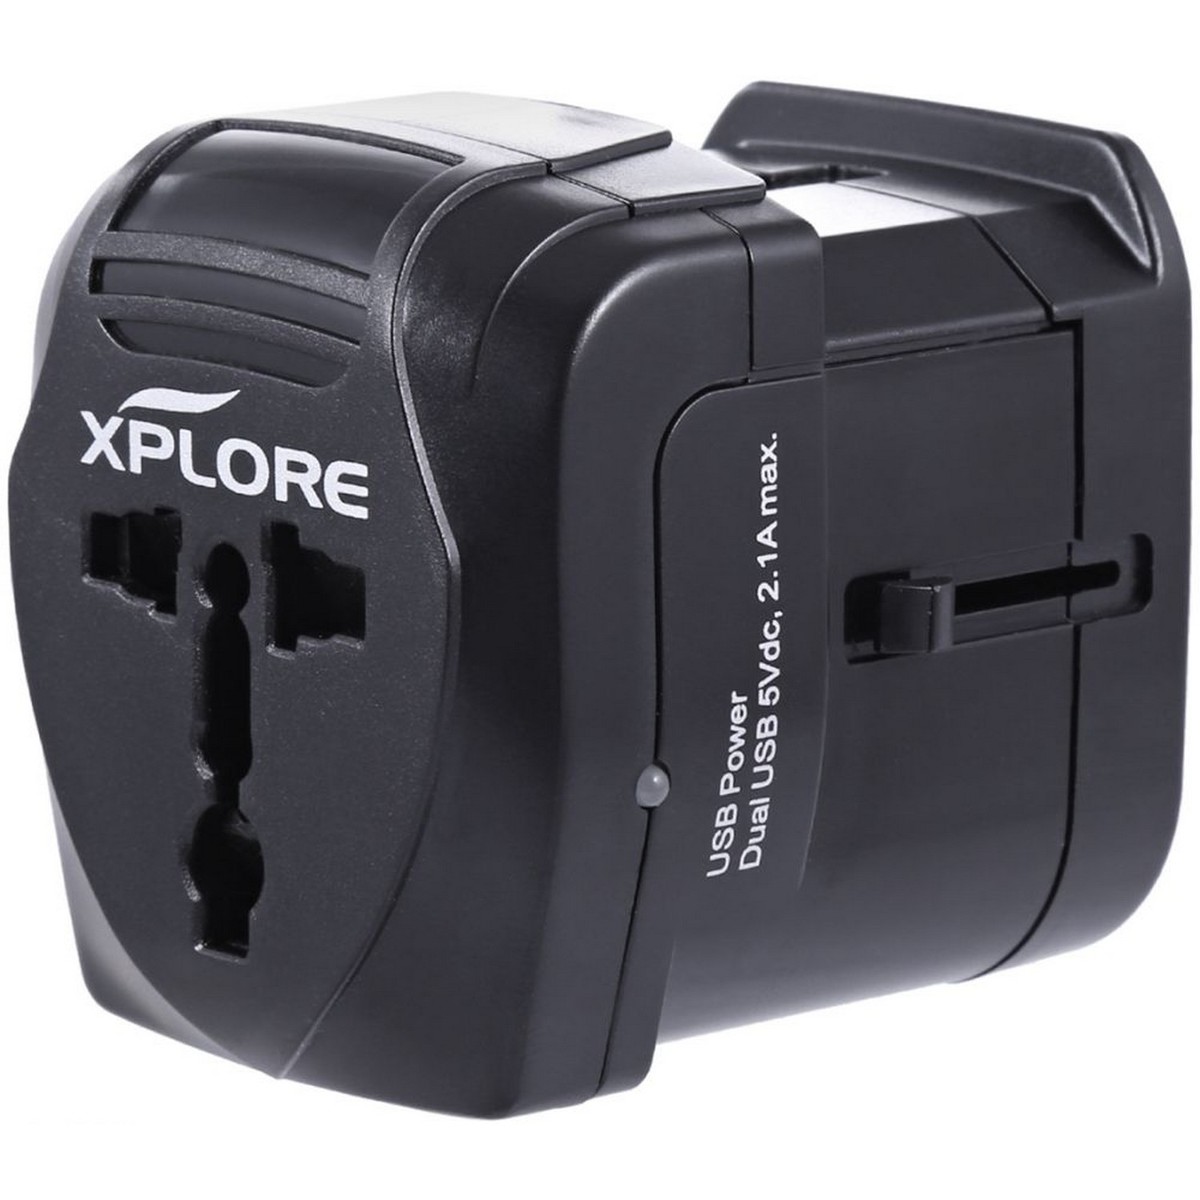 Xplore Home Charger With 2USB XP168